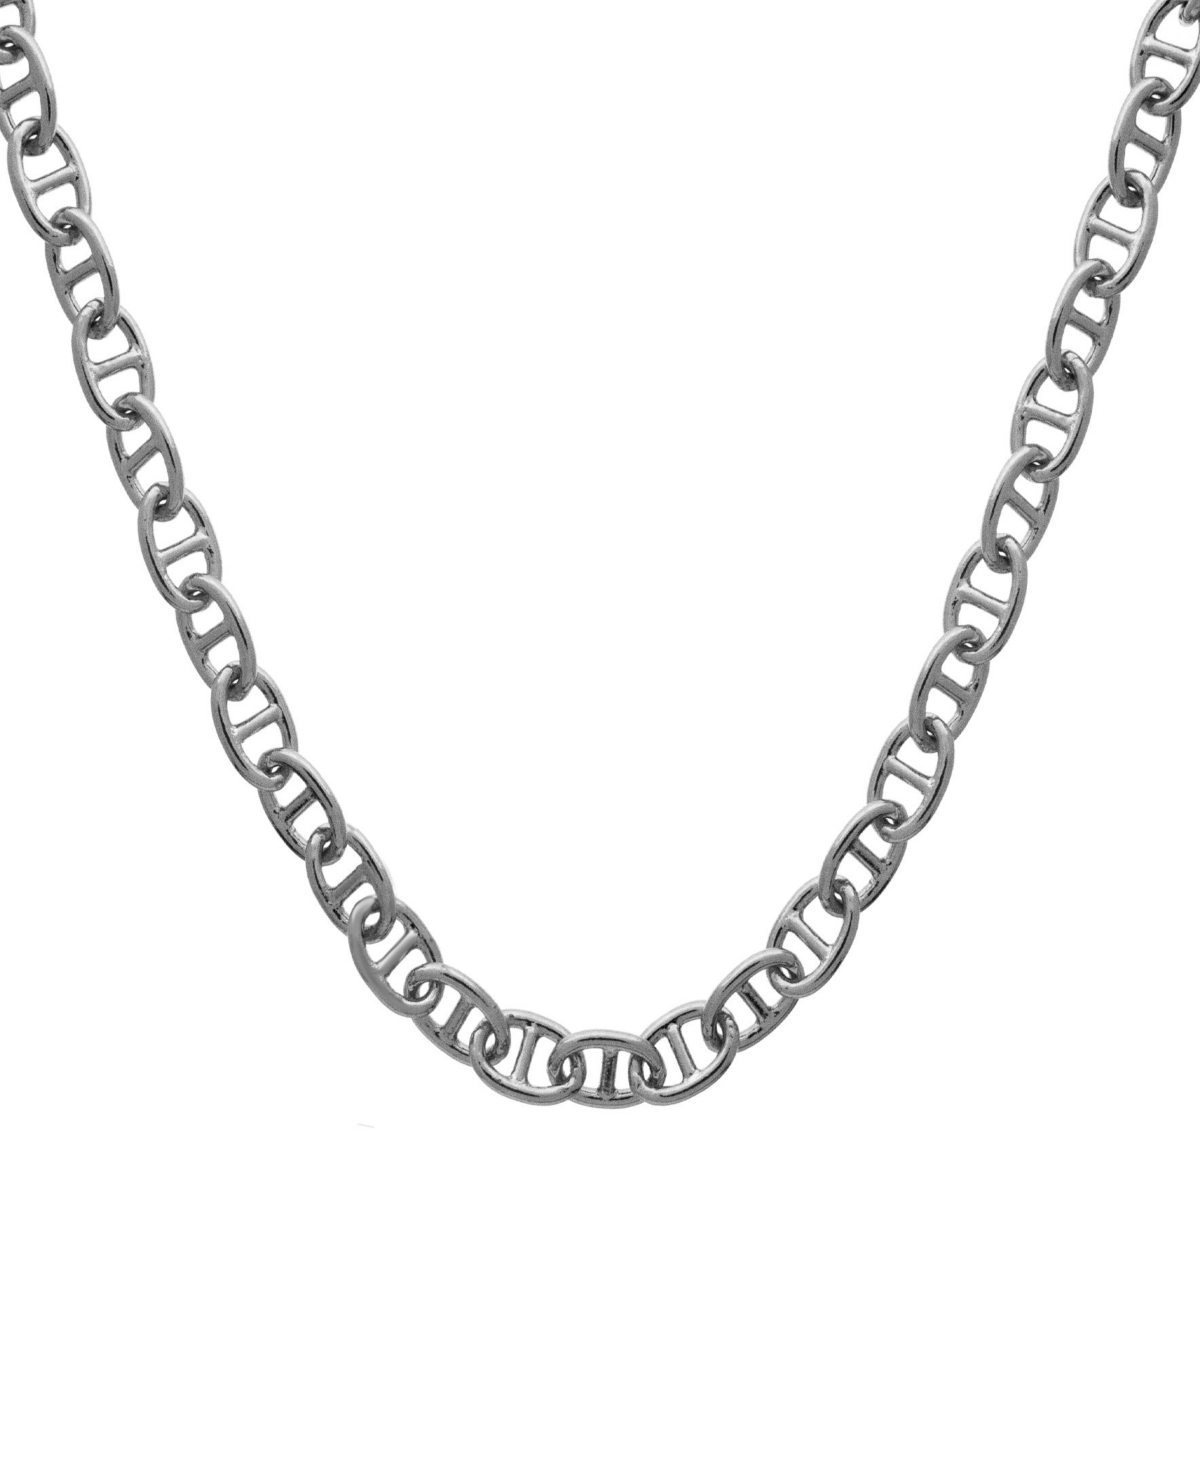 18" Silver Plated Marina Link Chain Necklace - Silver Plated